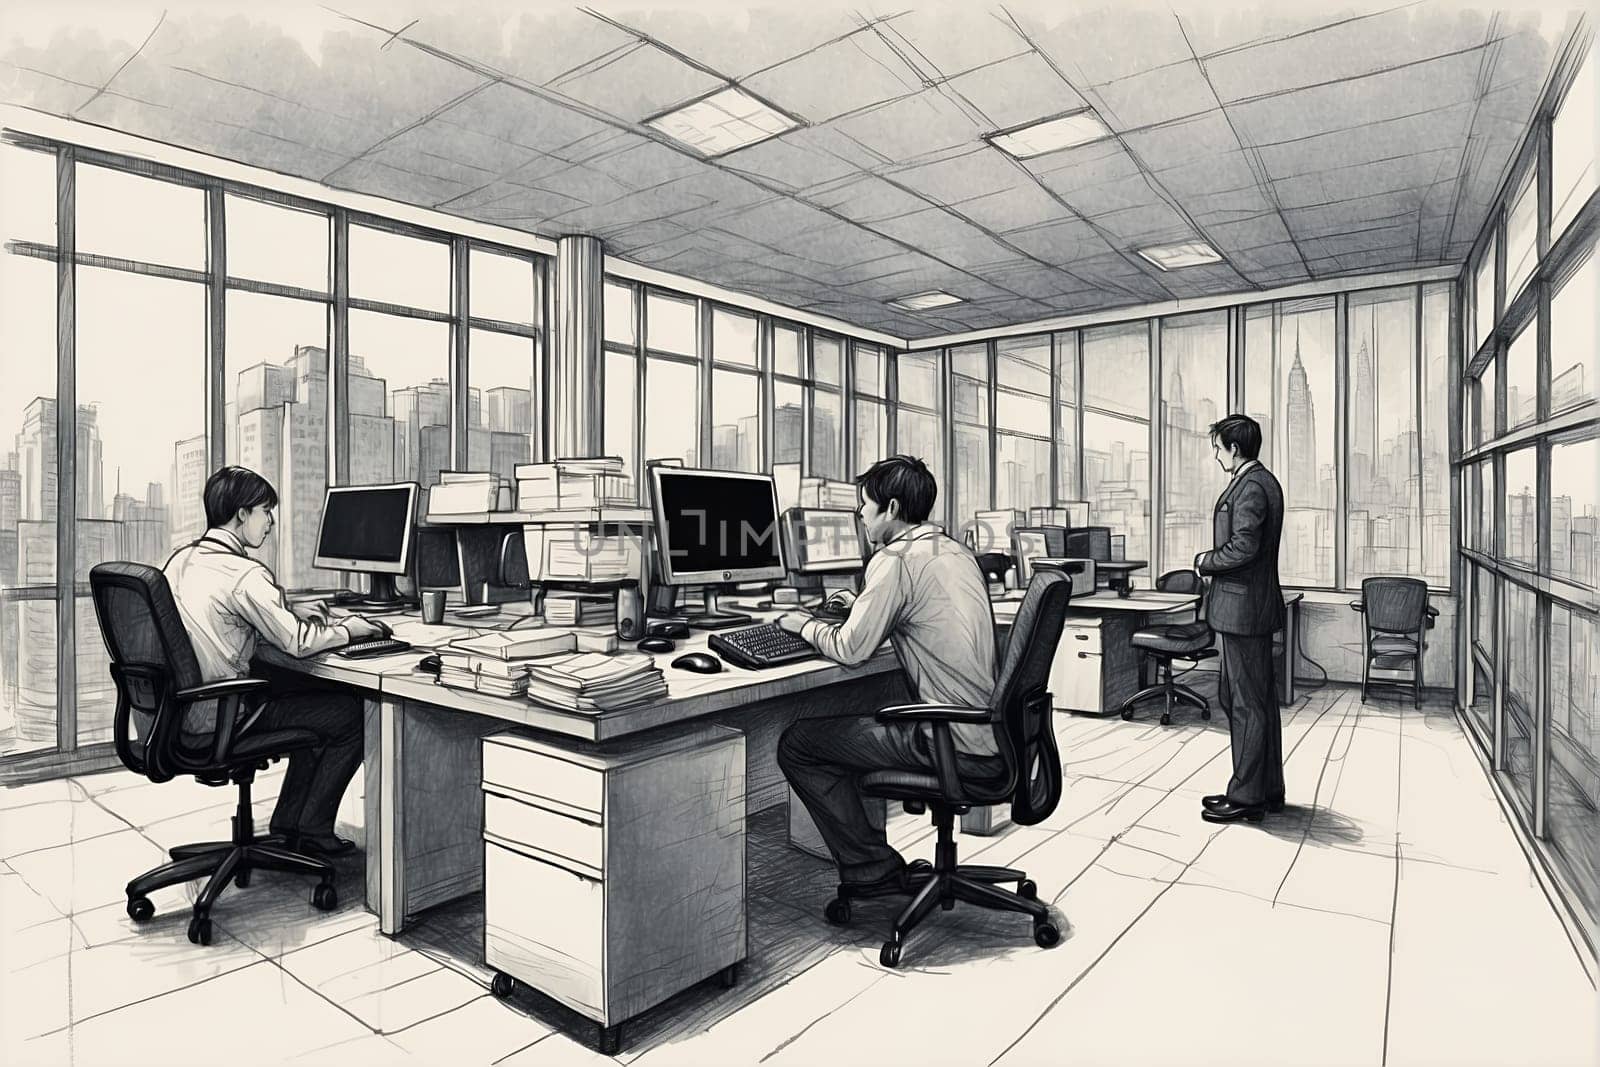 This black and white drawing depicts a group of individuals engaged in various tasks at their computer workstations.